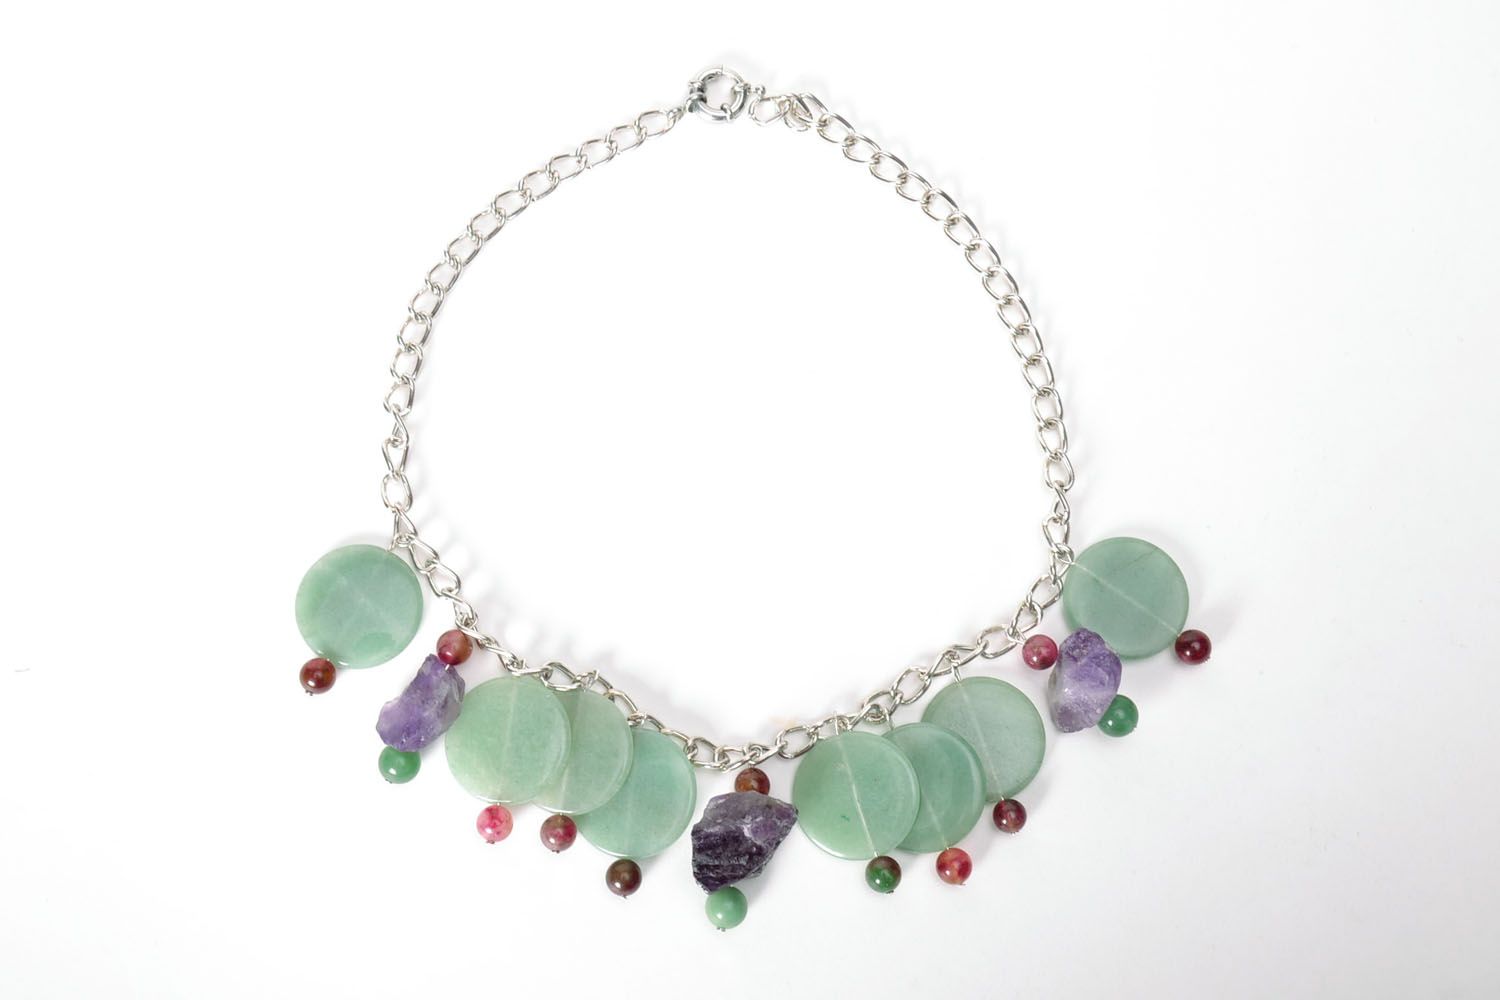 Homemade necklace with natural stones photo 2